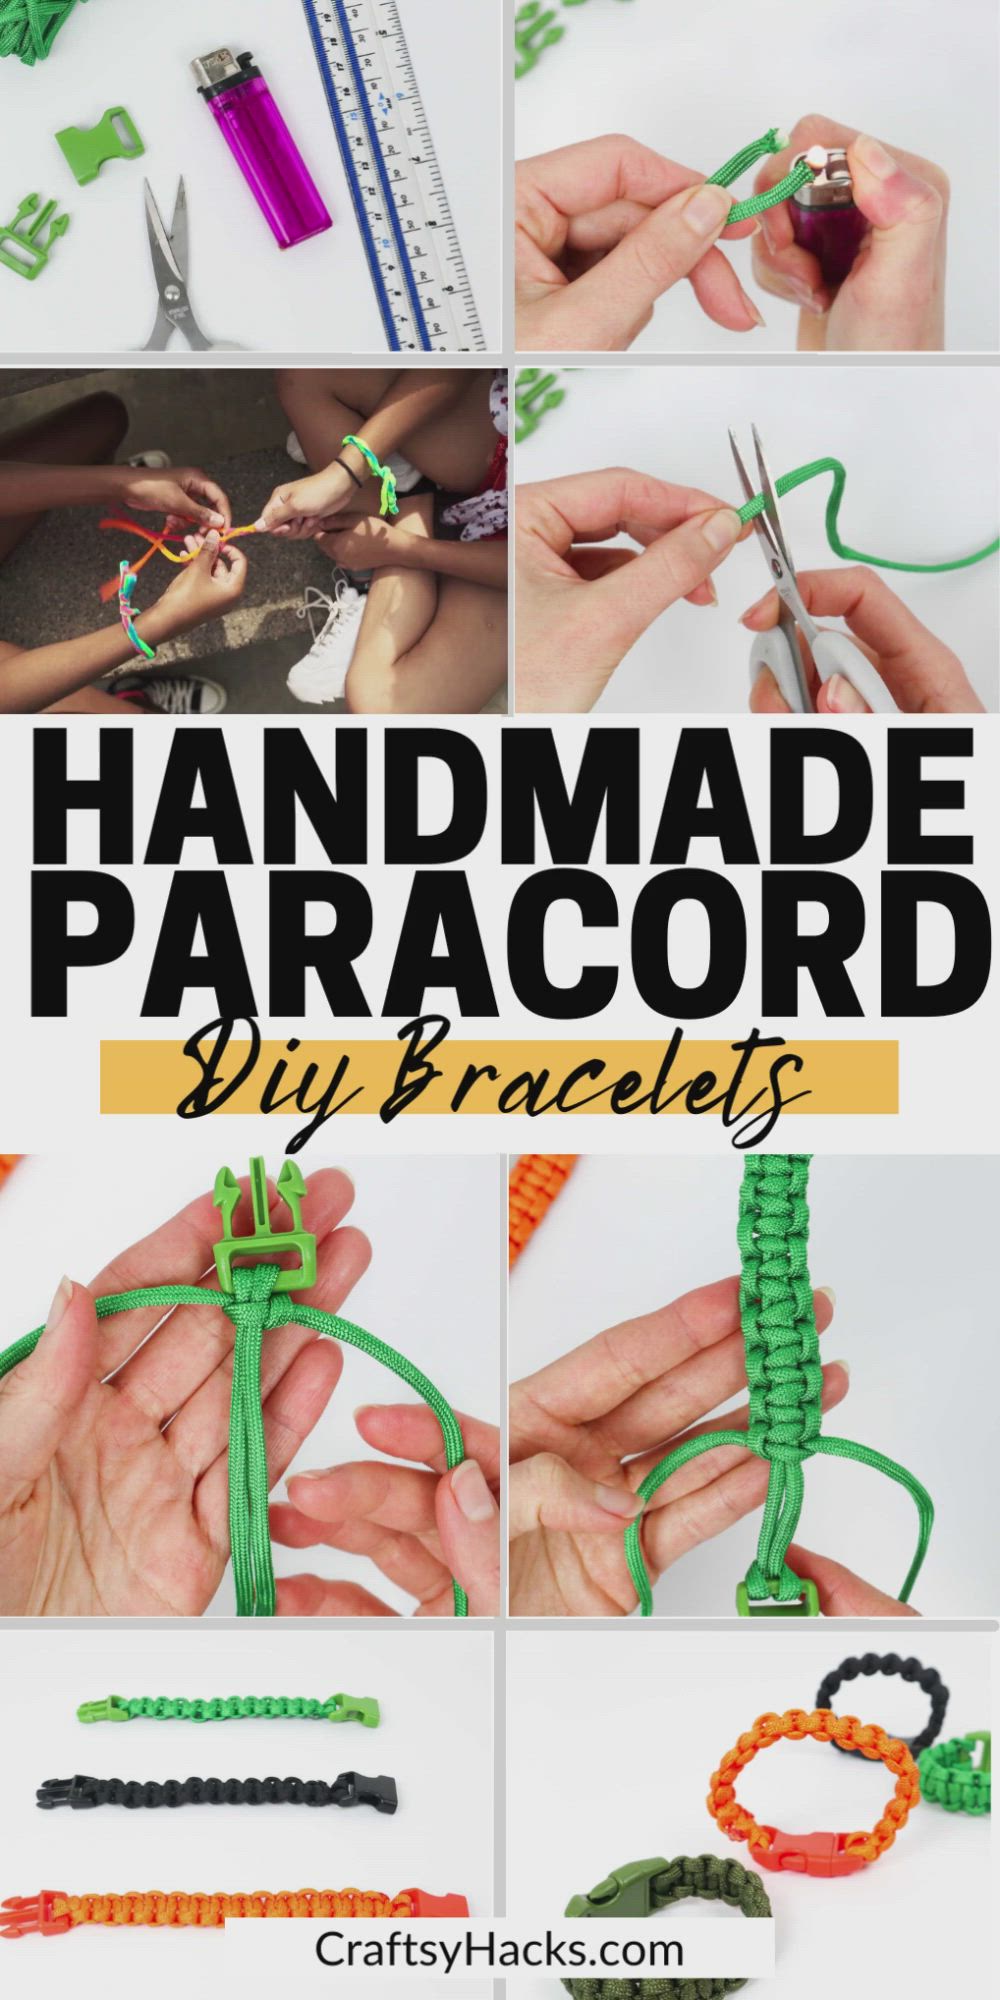 This may contain: the instructions for how to make handmade paracord bracelets with green string